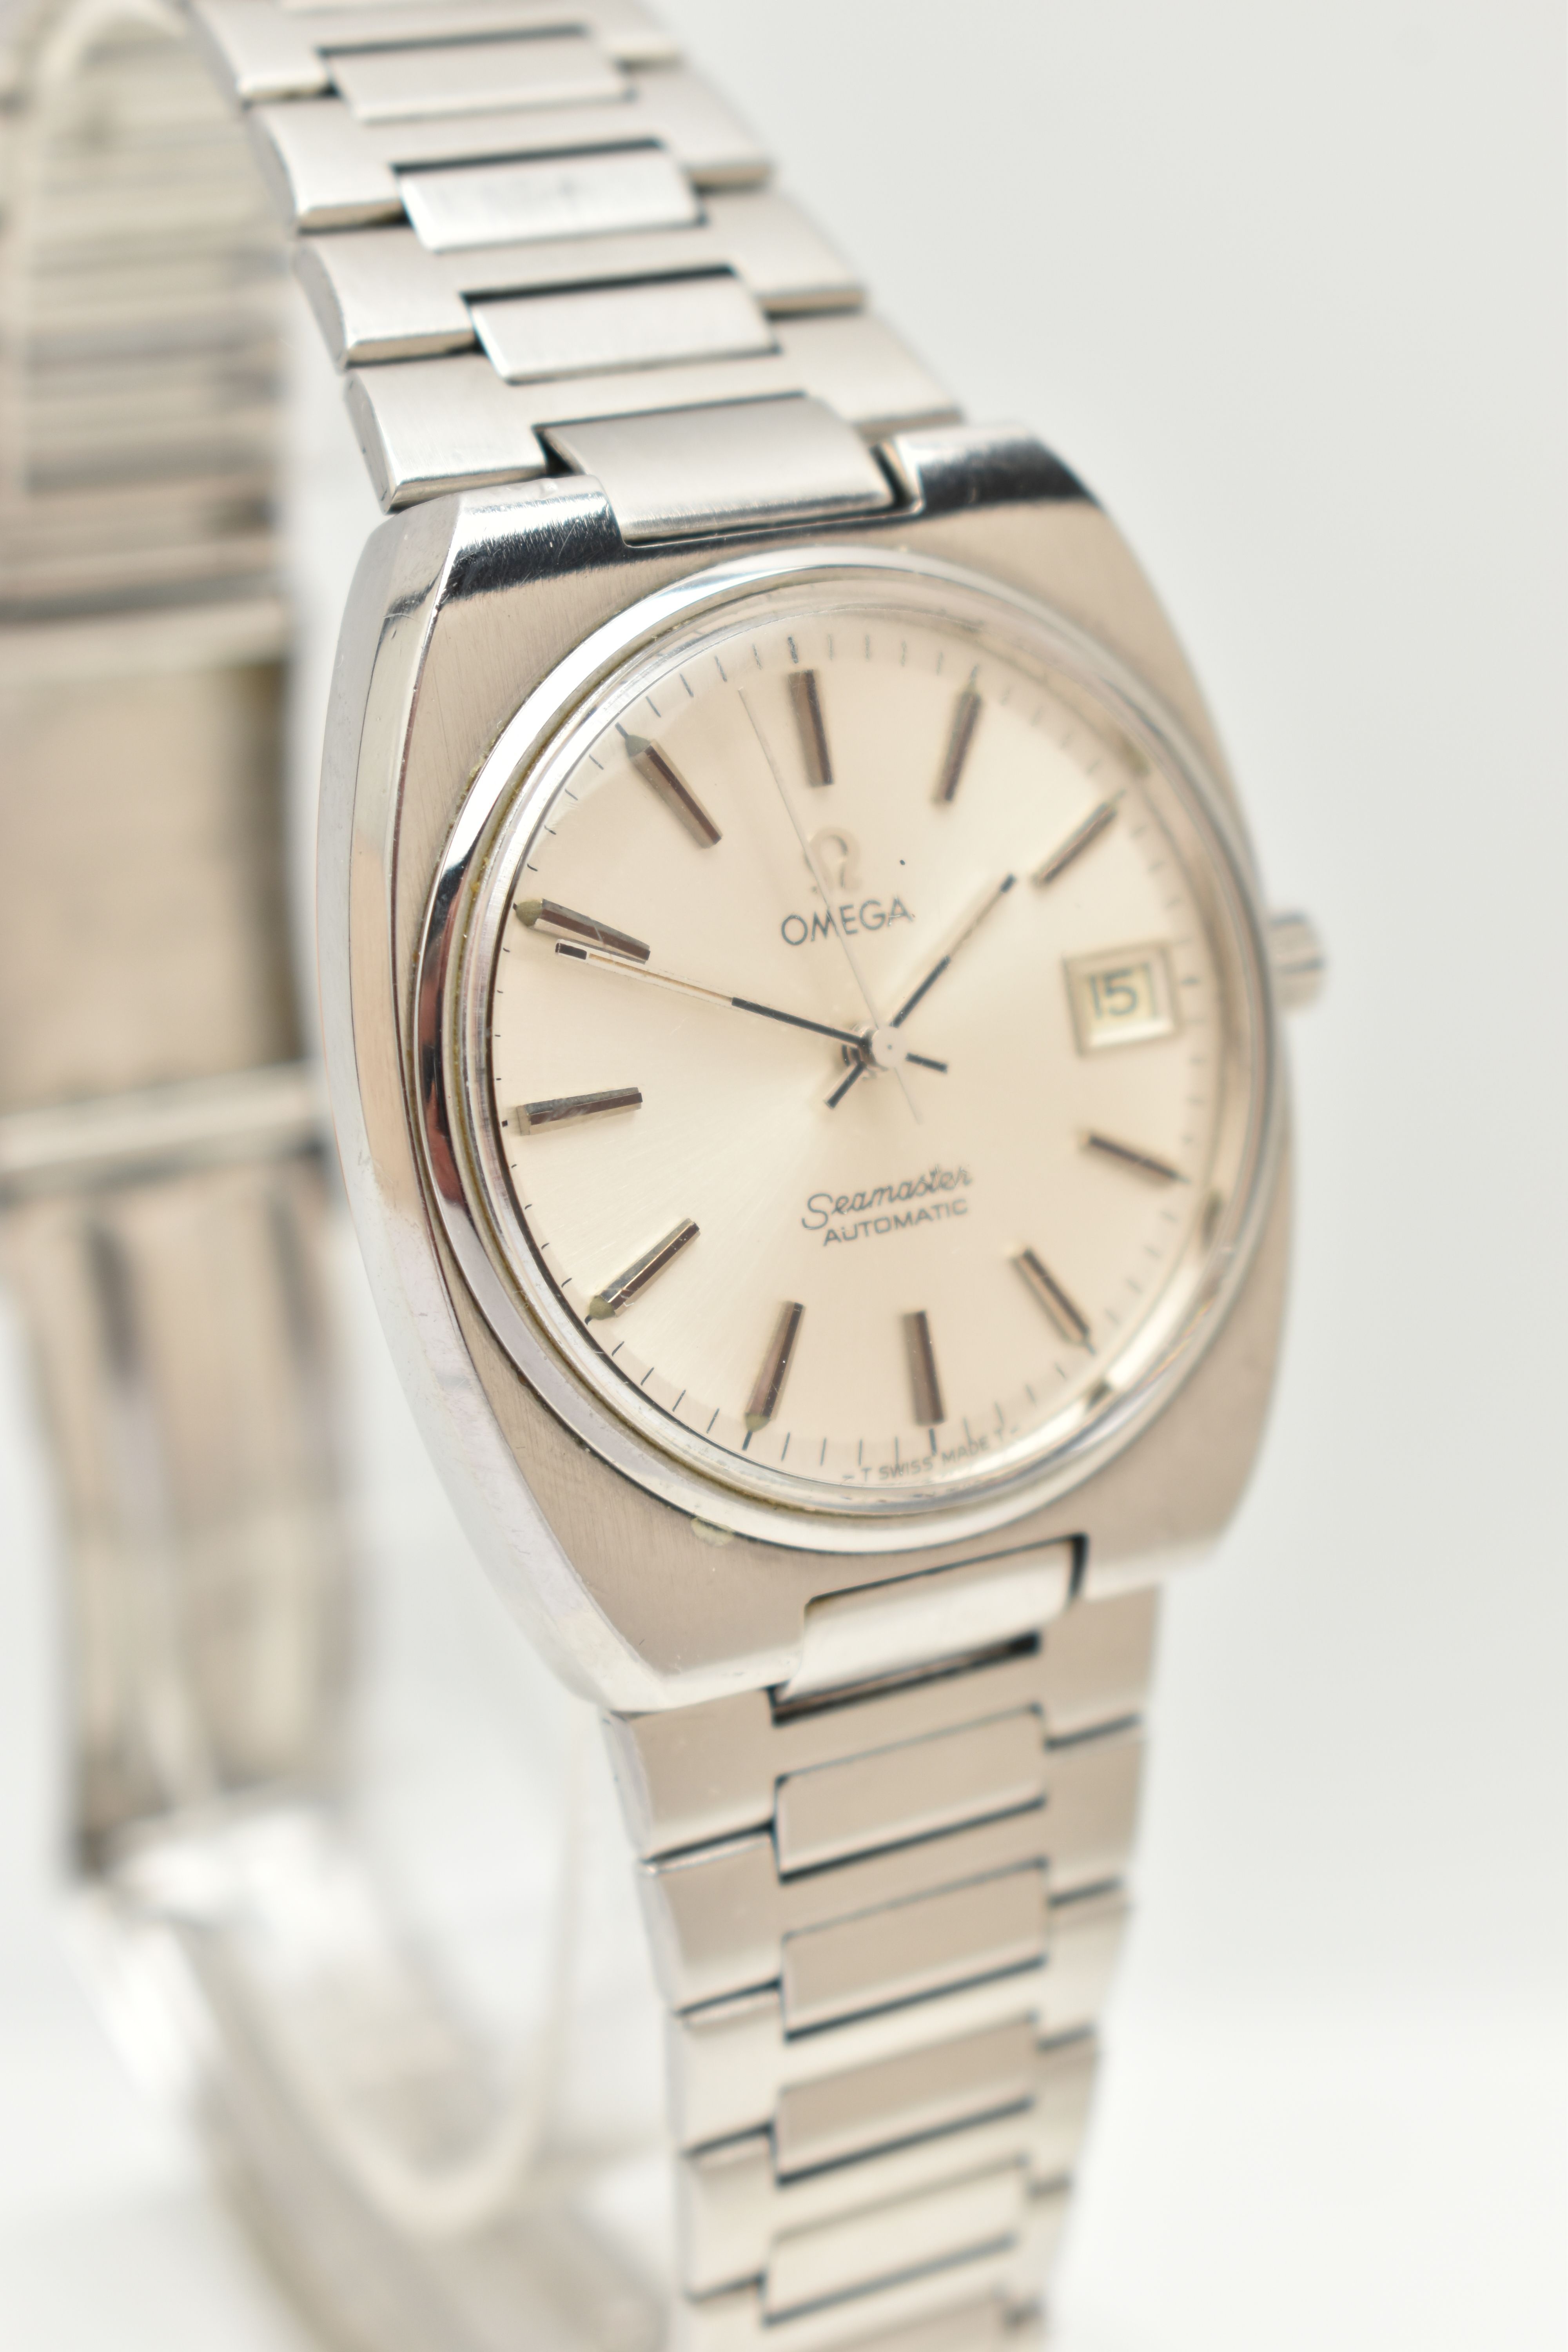 AN 'OMEGA' SEAMASTER WRISTWATCH, automatic movement, round silver tone dial signed 'Omega - Image 2 of 7